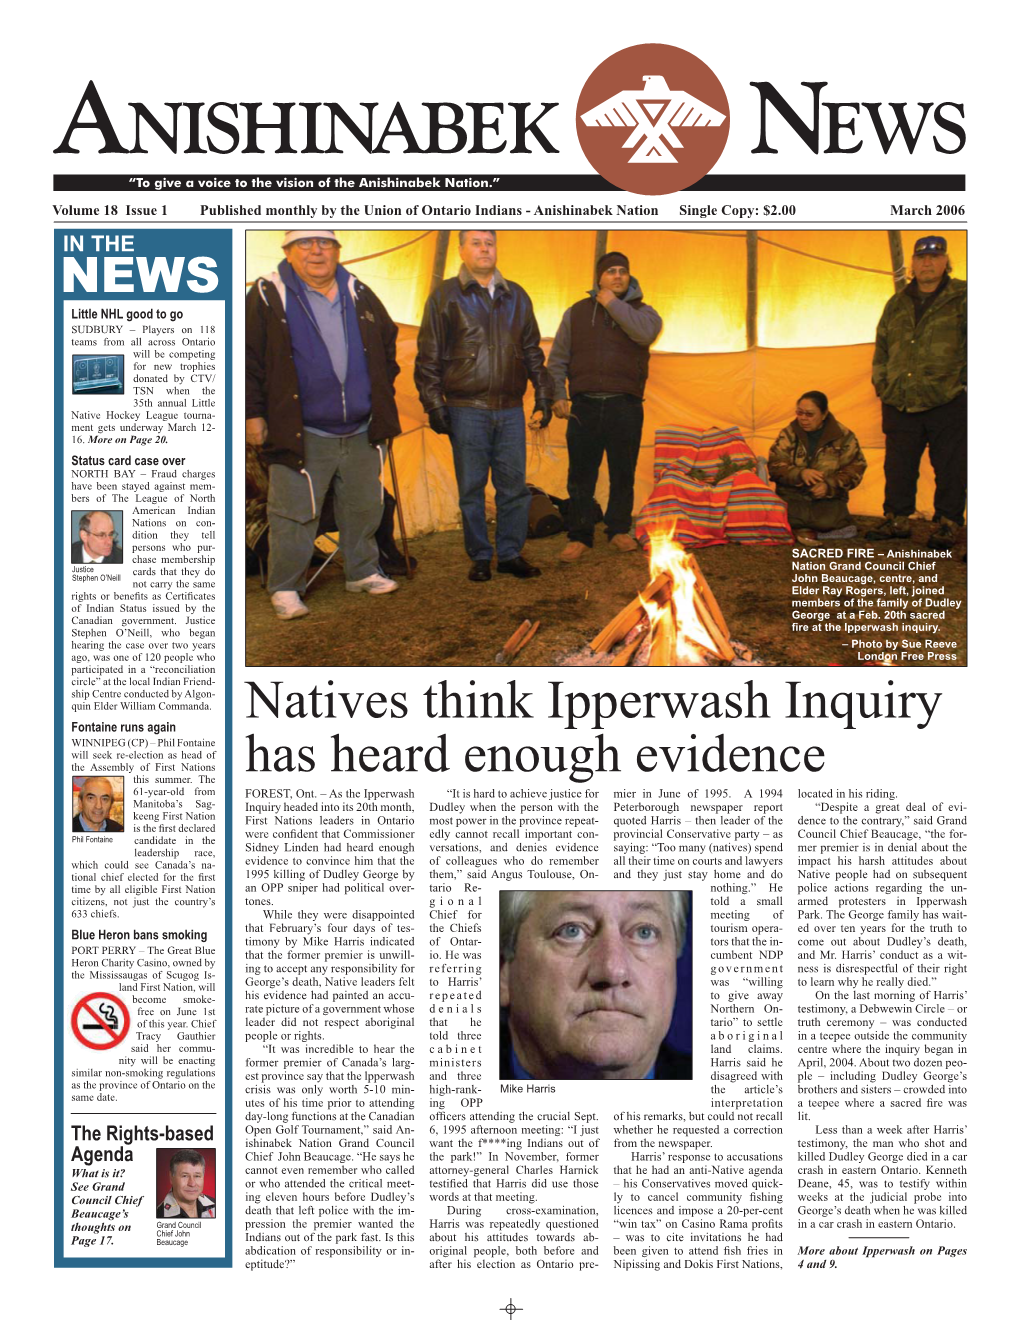 Natives Think Ipperwash Inquiry Has Heard Enough Evidence